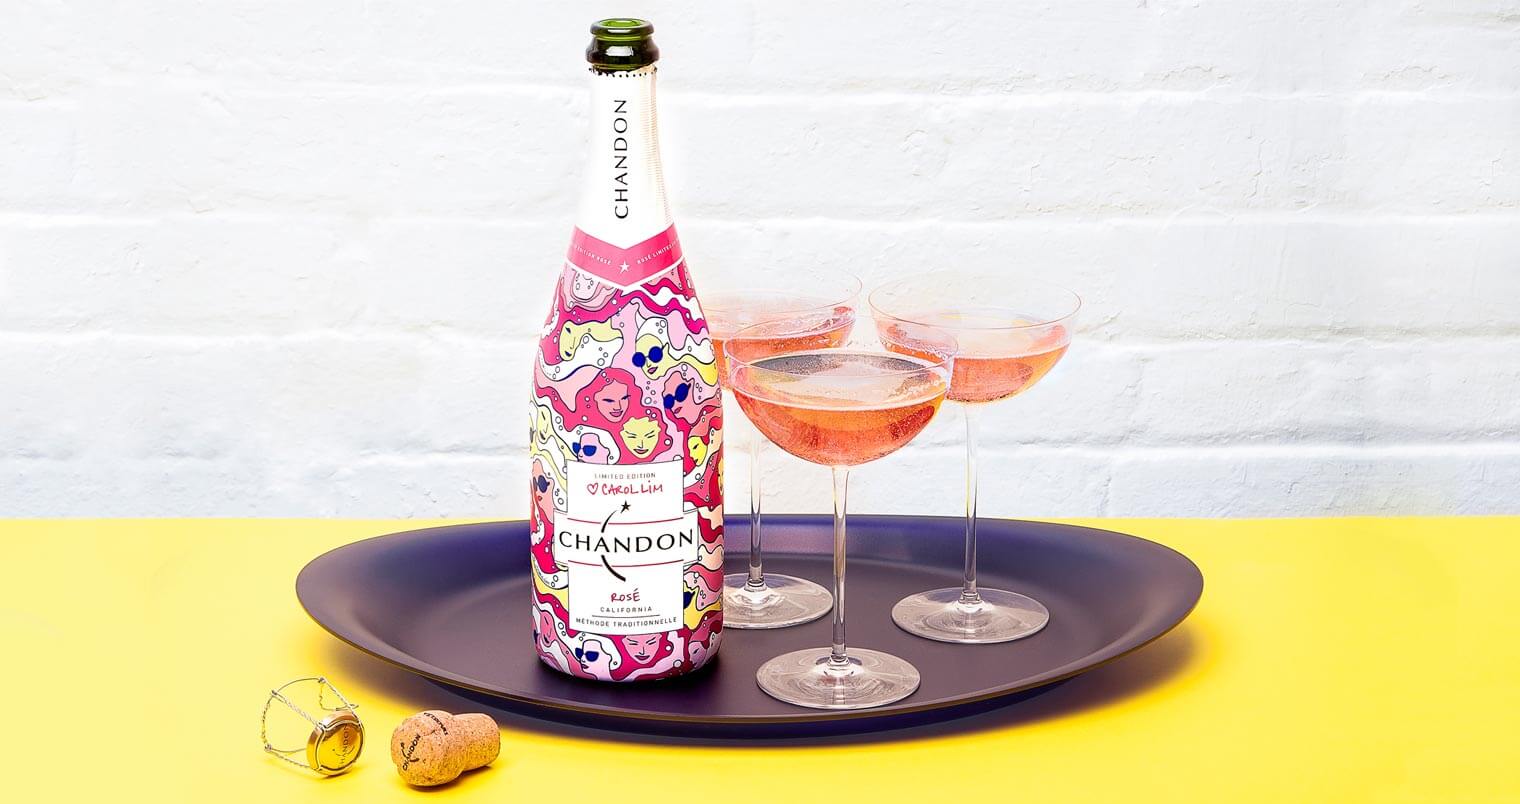 Celebrate Valentine's Day with Moët, champagne and cocktails, featured brands, featured image